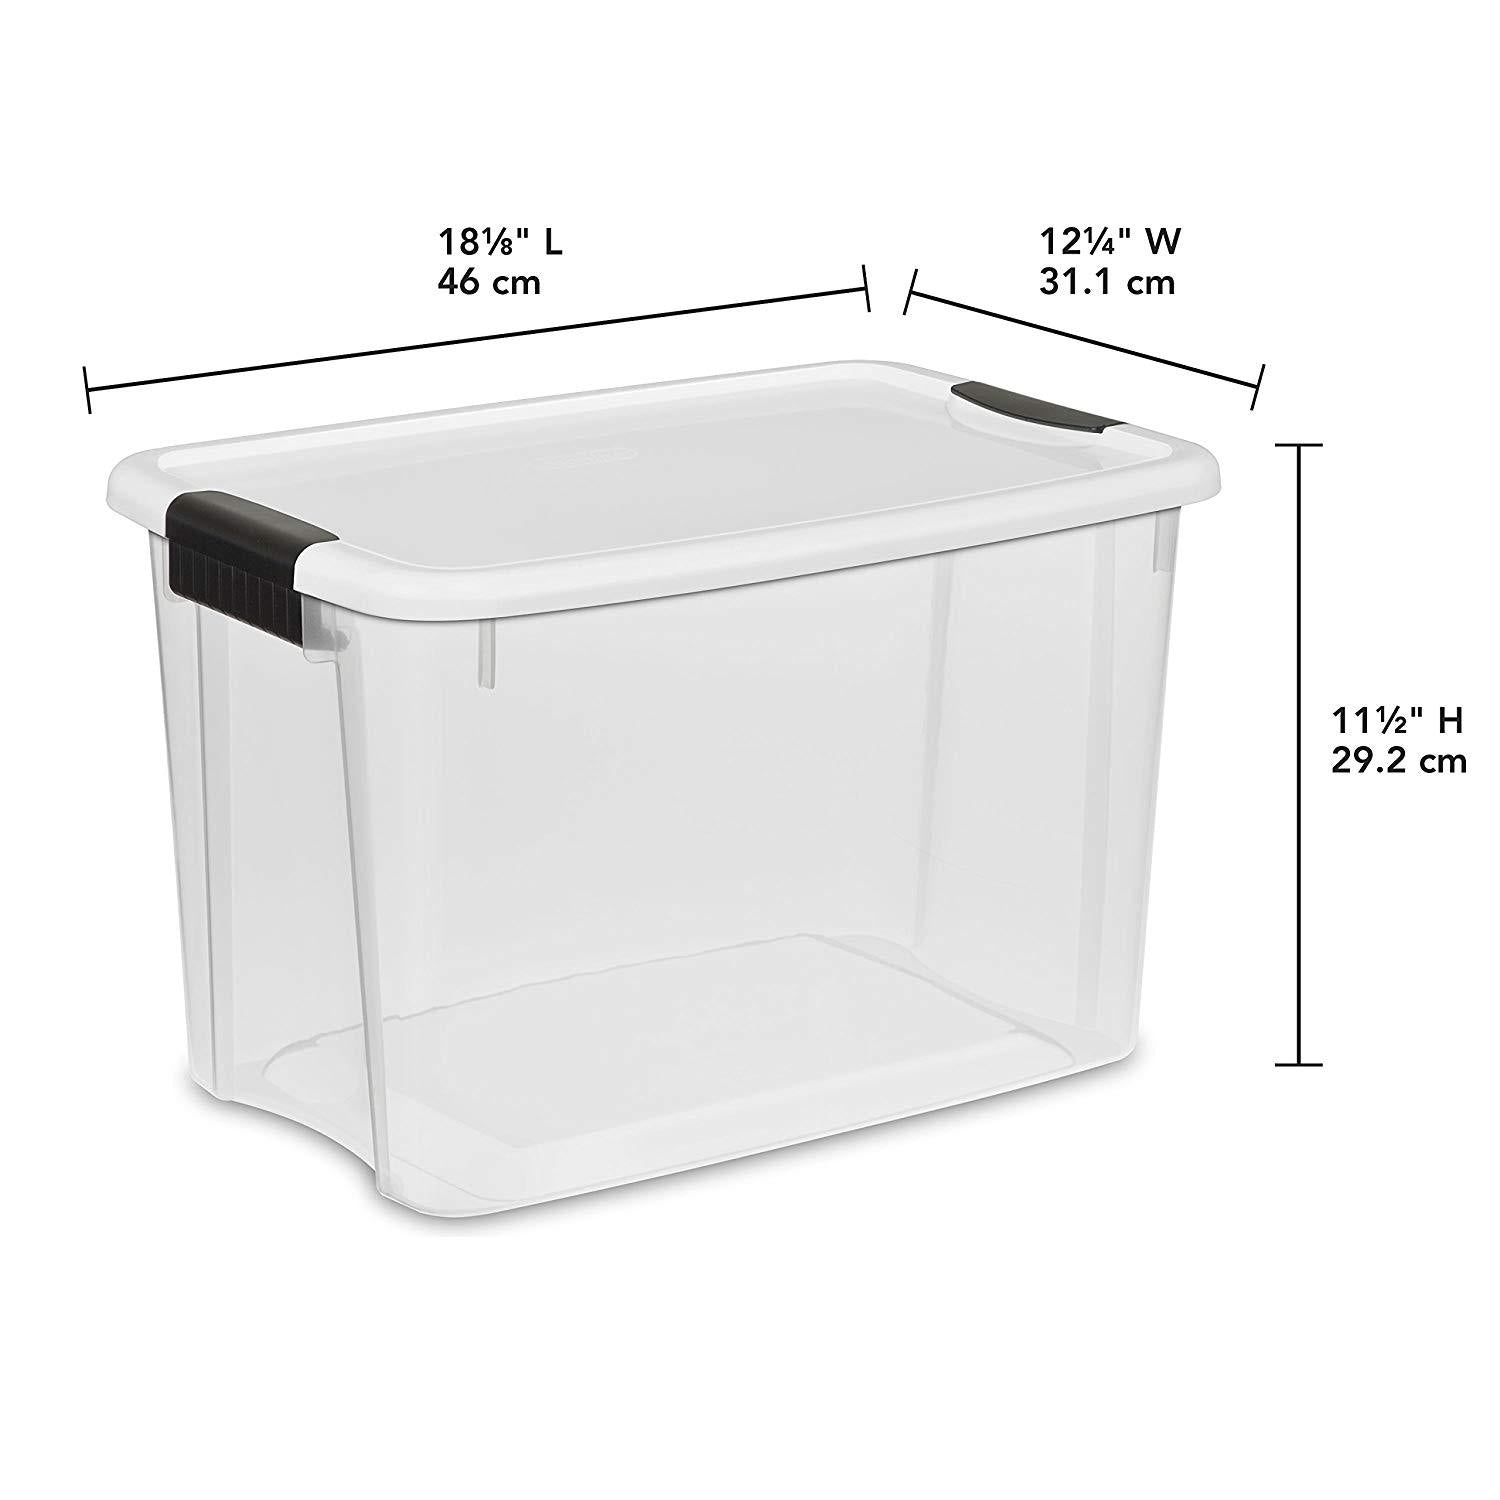 QRInnovations 6 Pack 46 qt Latch Box Plastic Totes Clear Storage Containers Bin Latching Lids